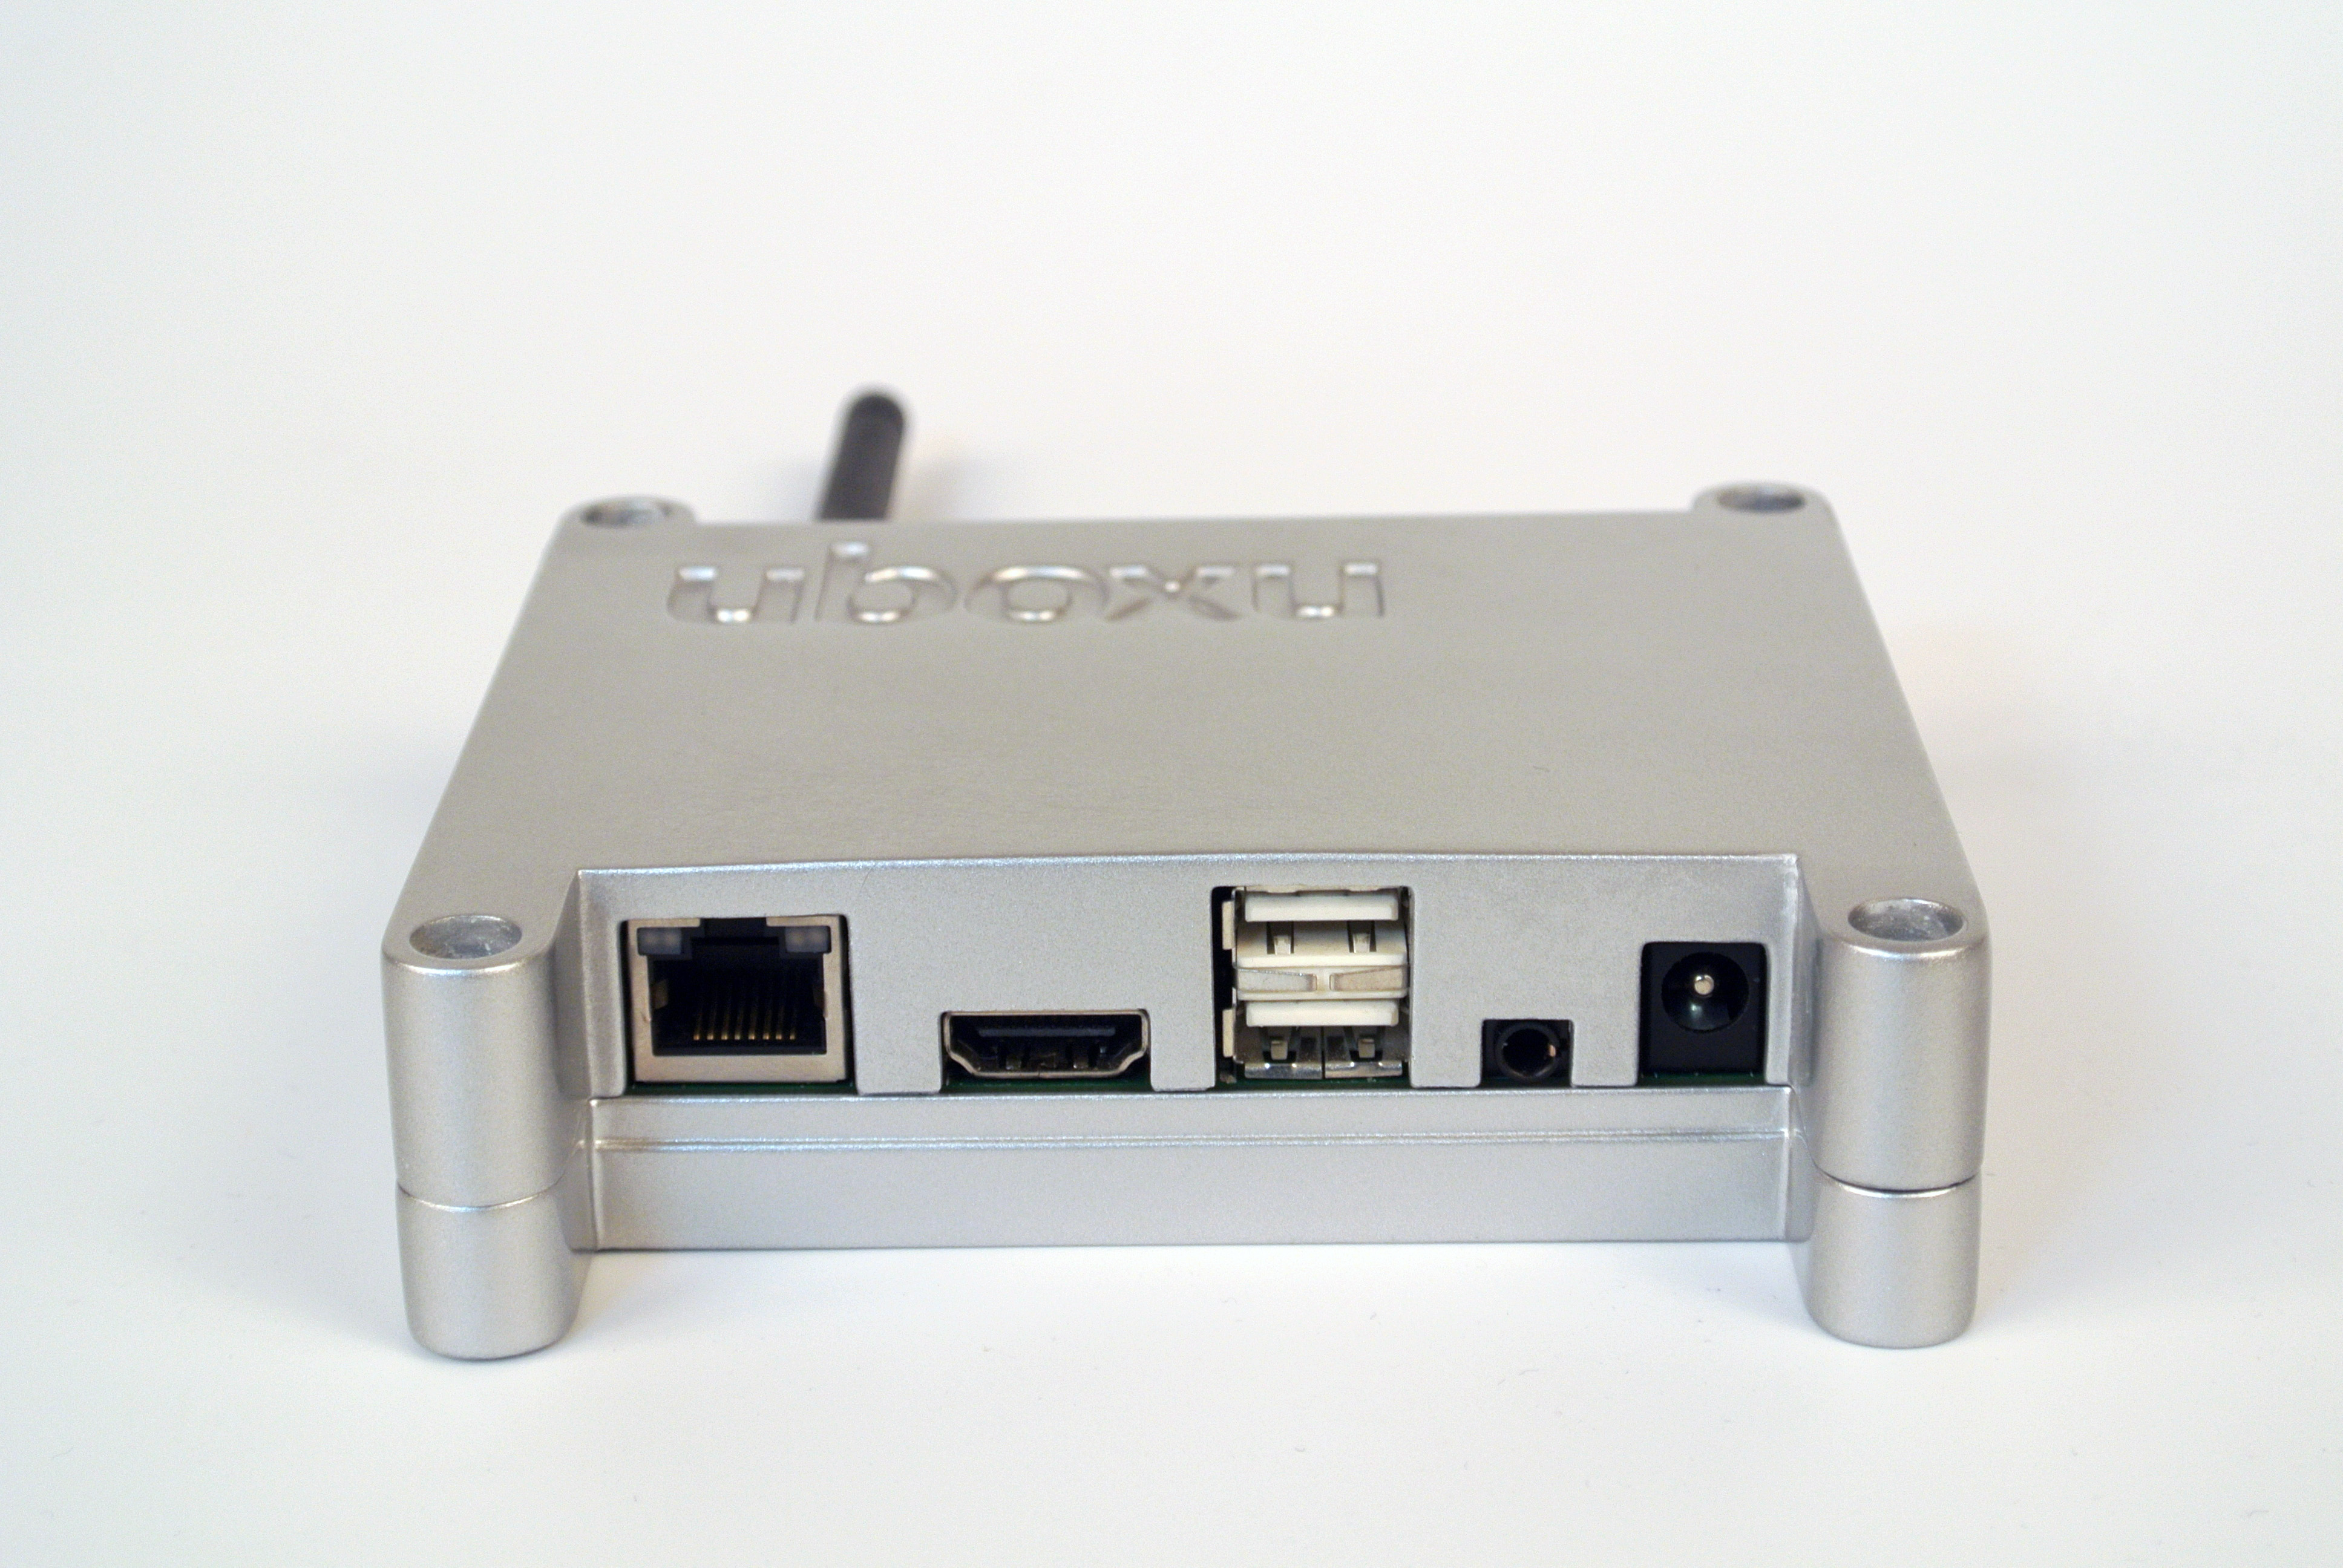 The Uboxu MS1 microserver runs pure web code in business locations.